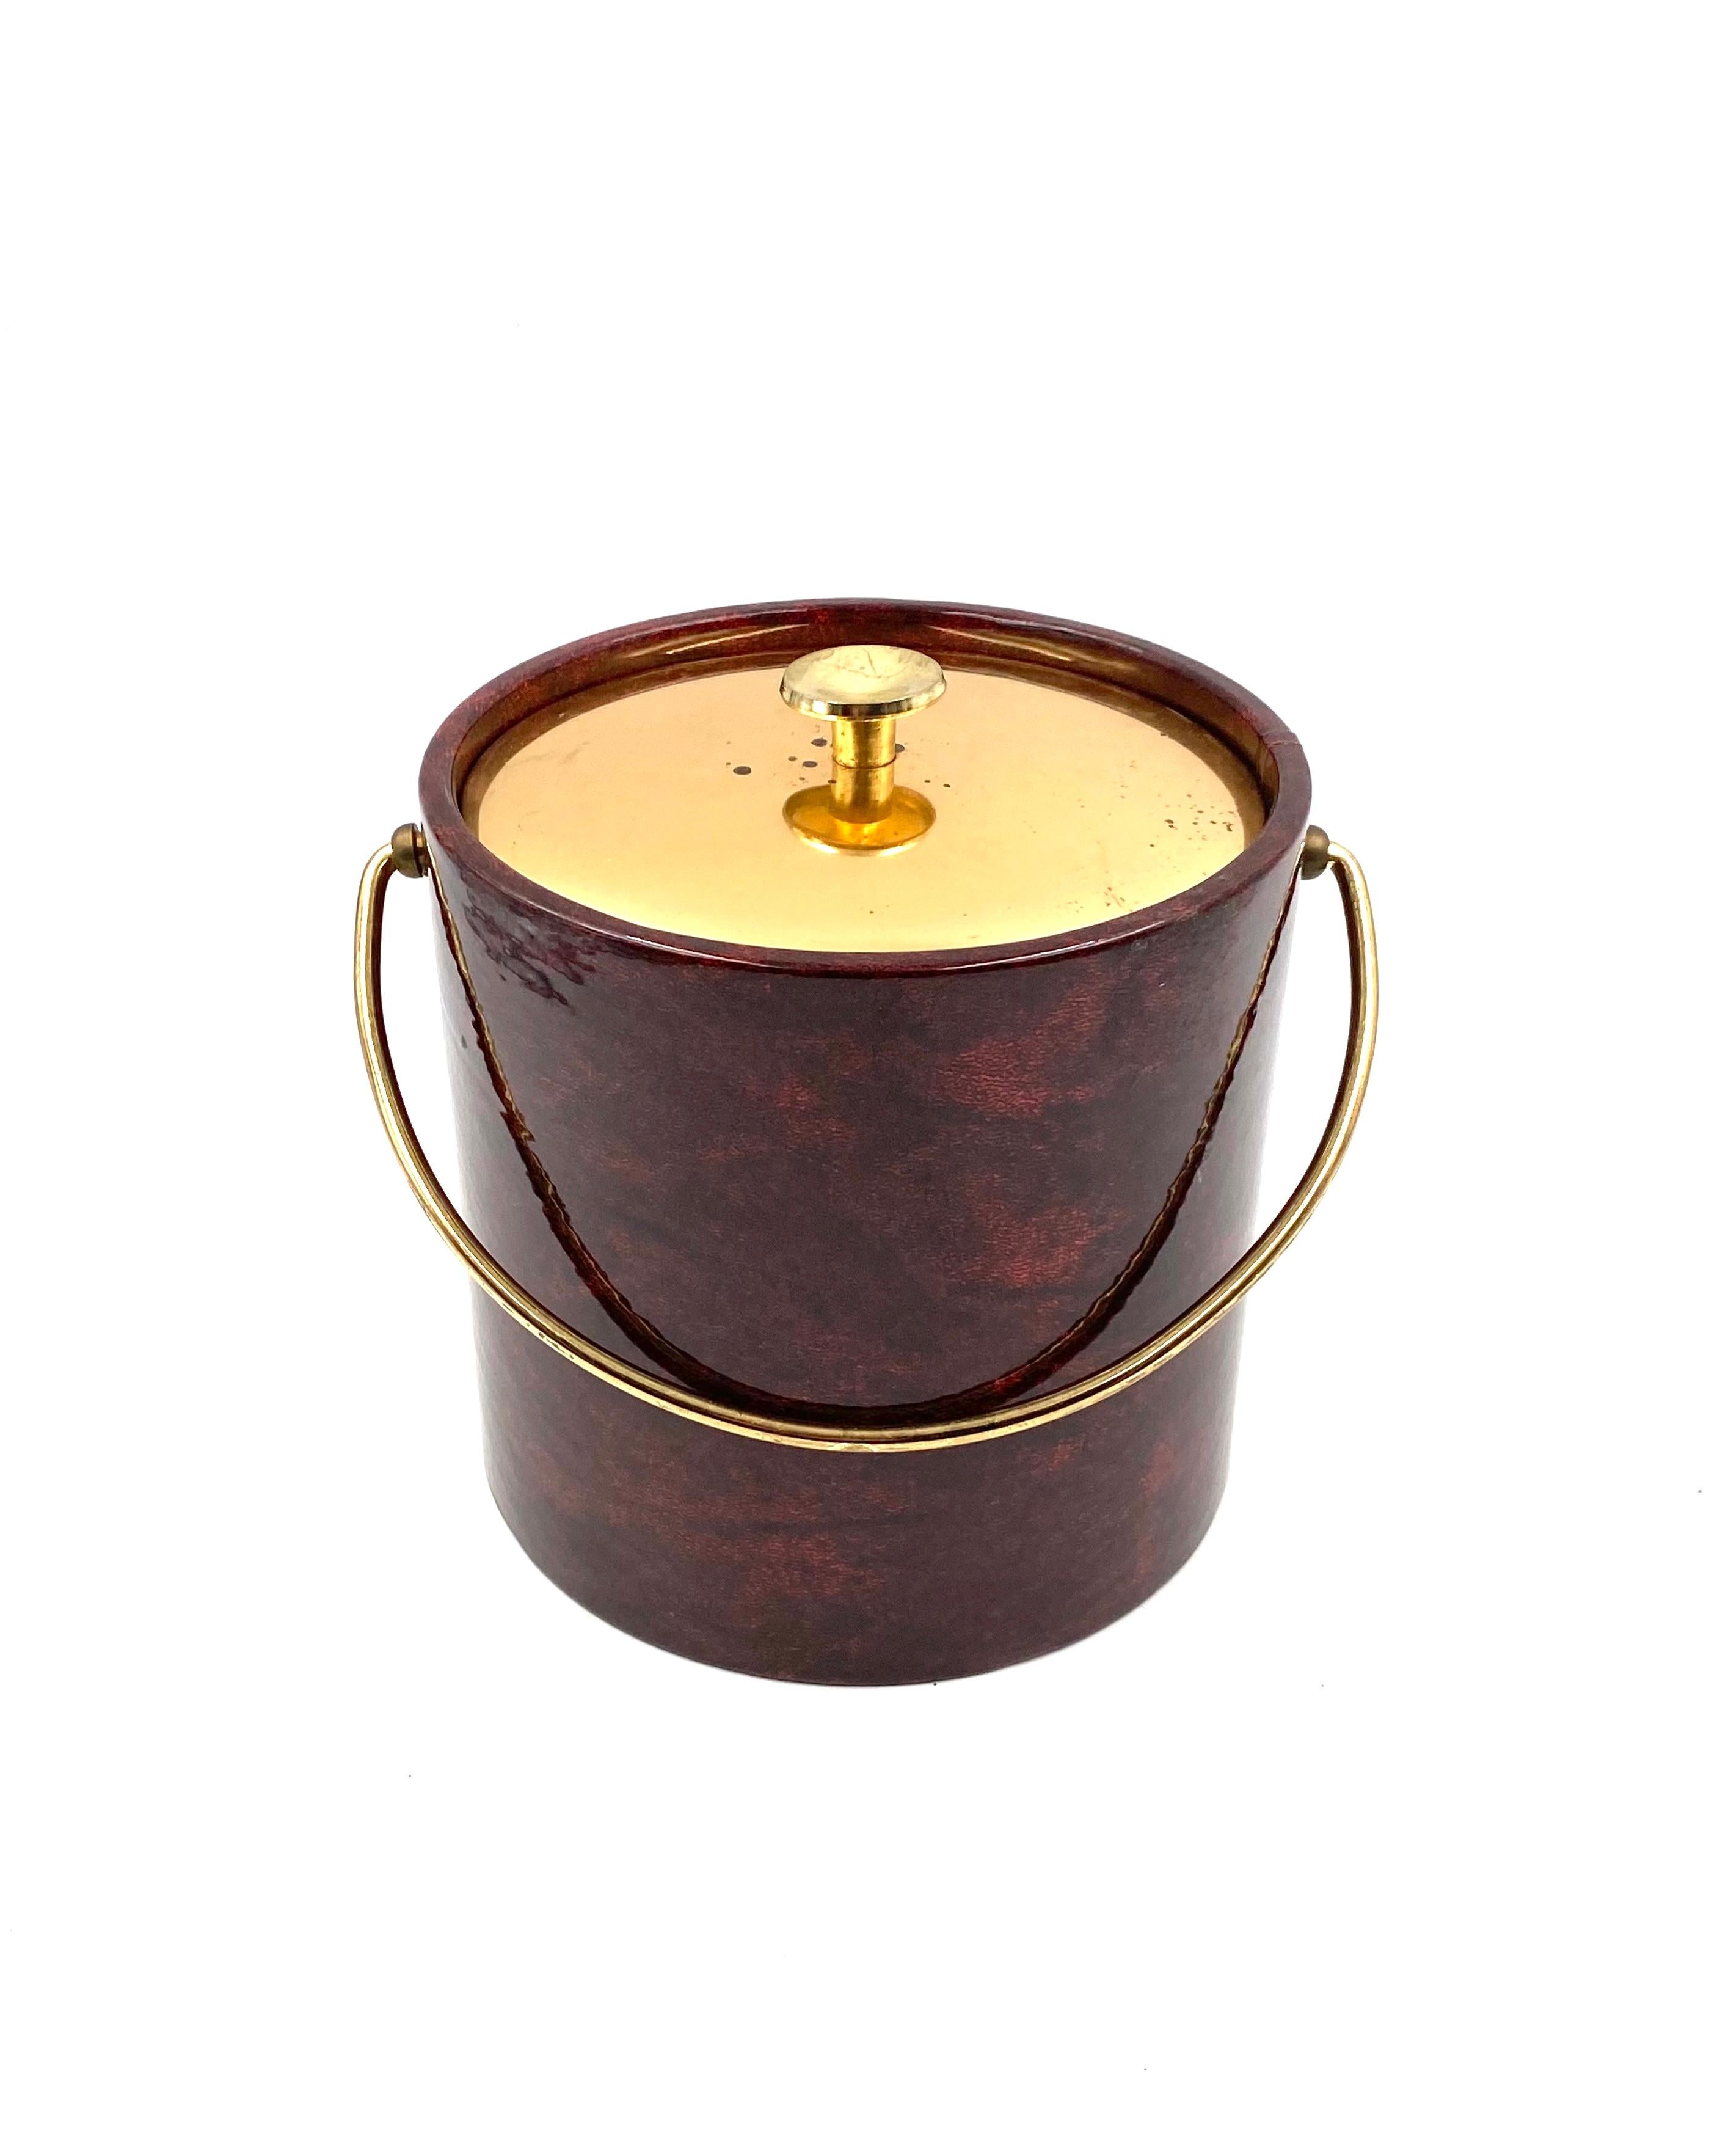 Aldo Tura, Brass and red Parchment cooler / Ice bucket, Italy 1960s For Sale 1